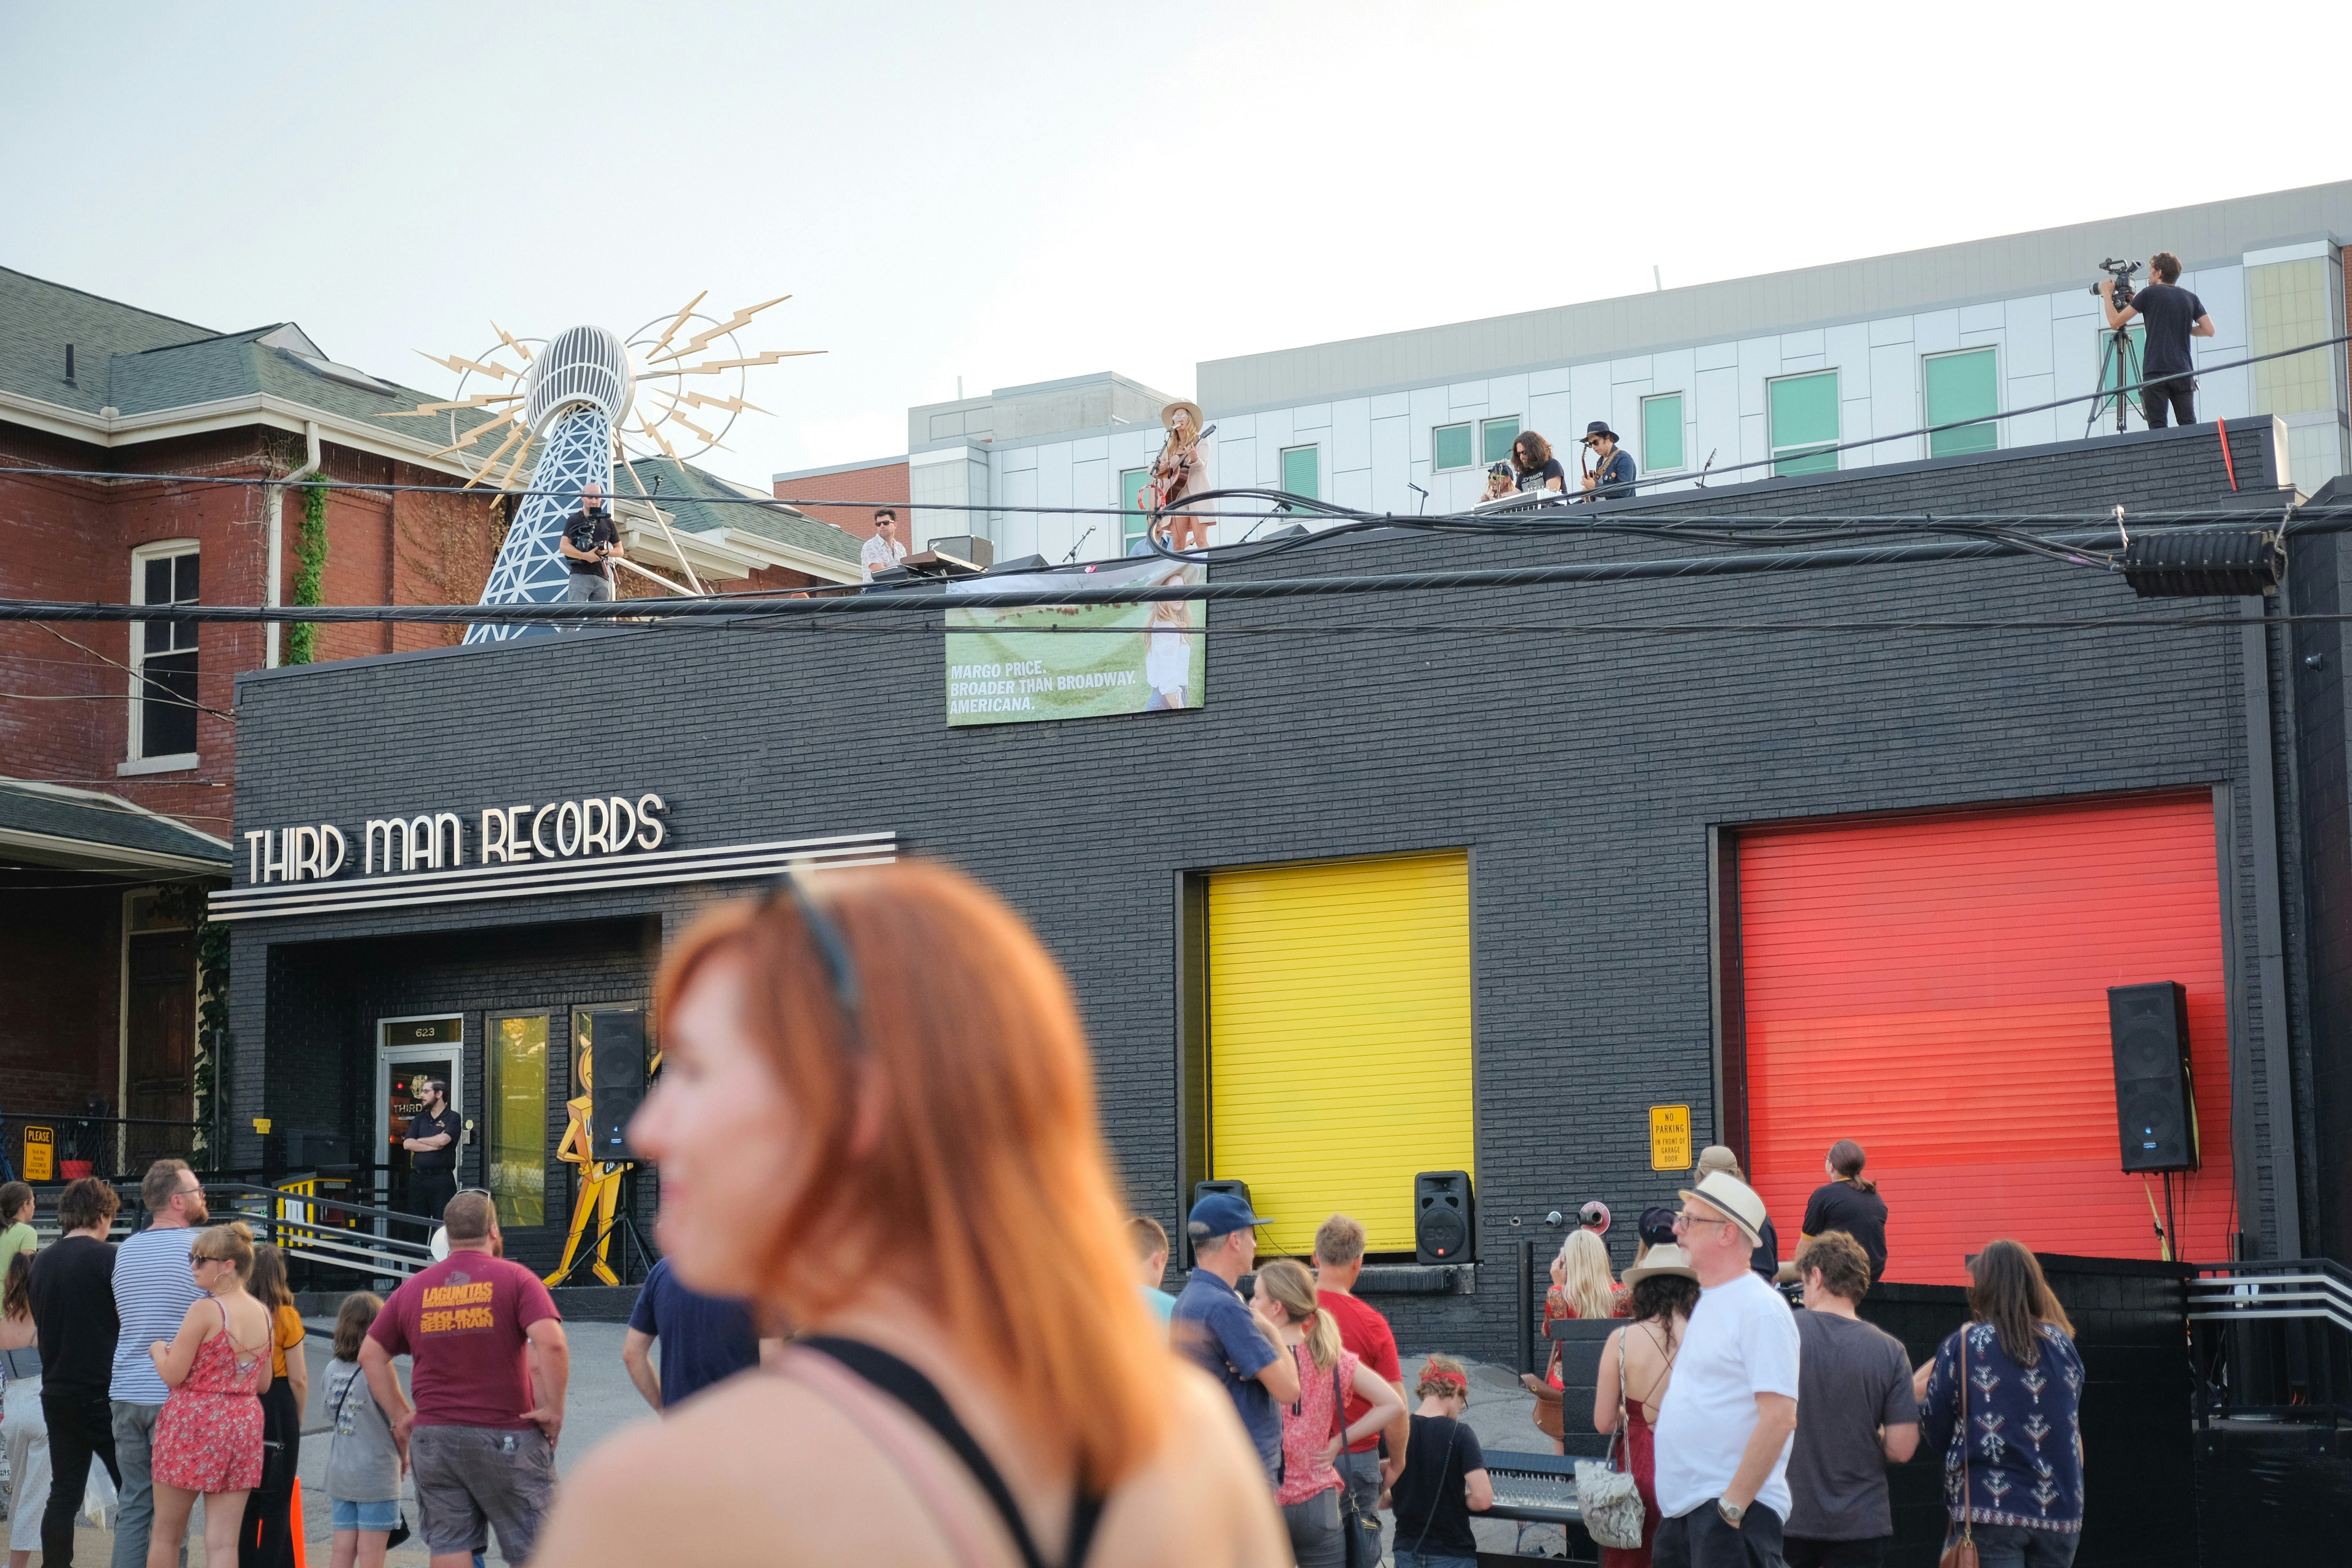 A red haired woman in a black tank top with black sunglasses stands in profile in front of a small crowd watching a rooftop concert on the black brick building of Third Man Records, with yellow and red brick insets in the facade. 